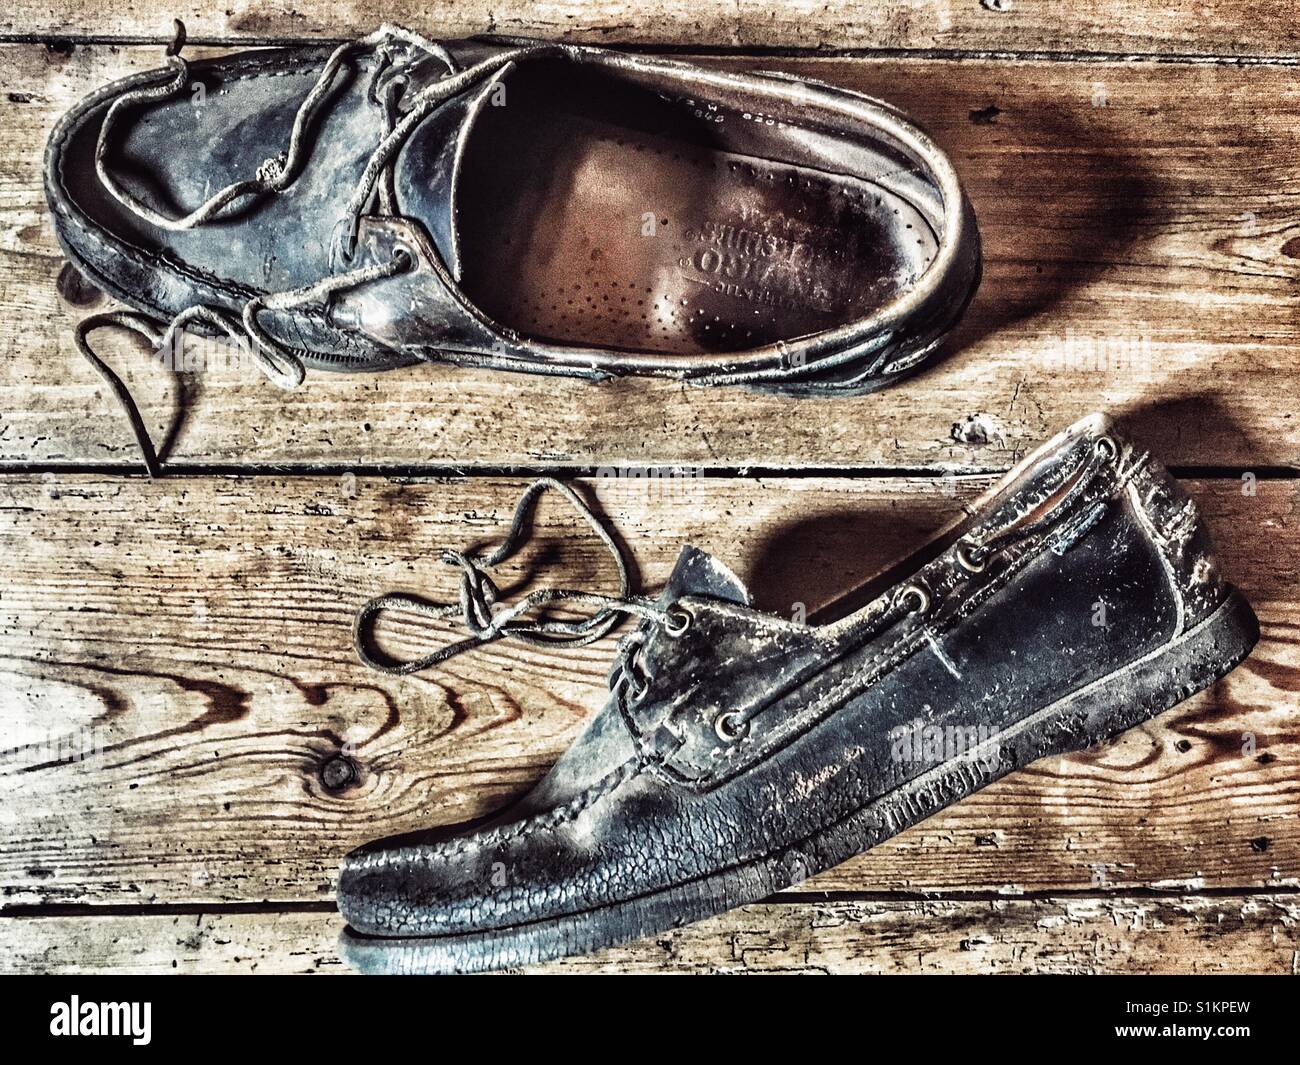 Page 2 - Boat Shoes High Resolution Stock Photography and Images - Alamy